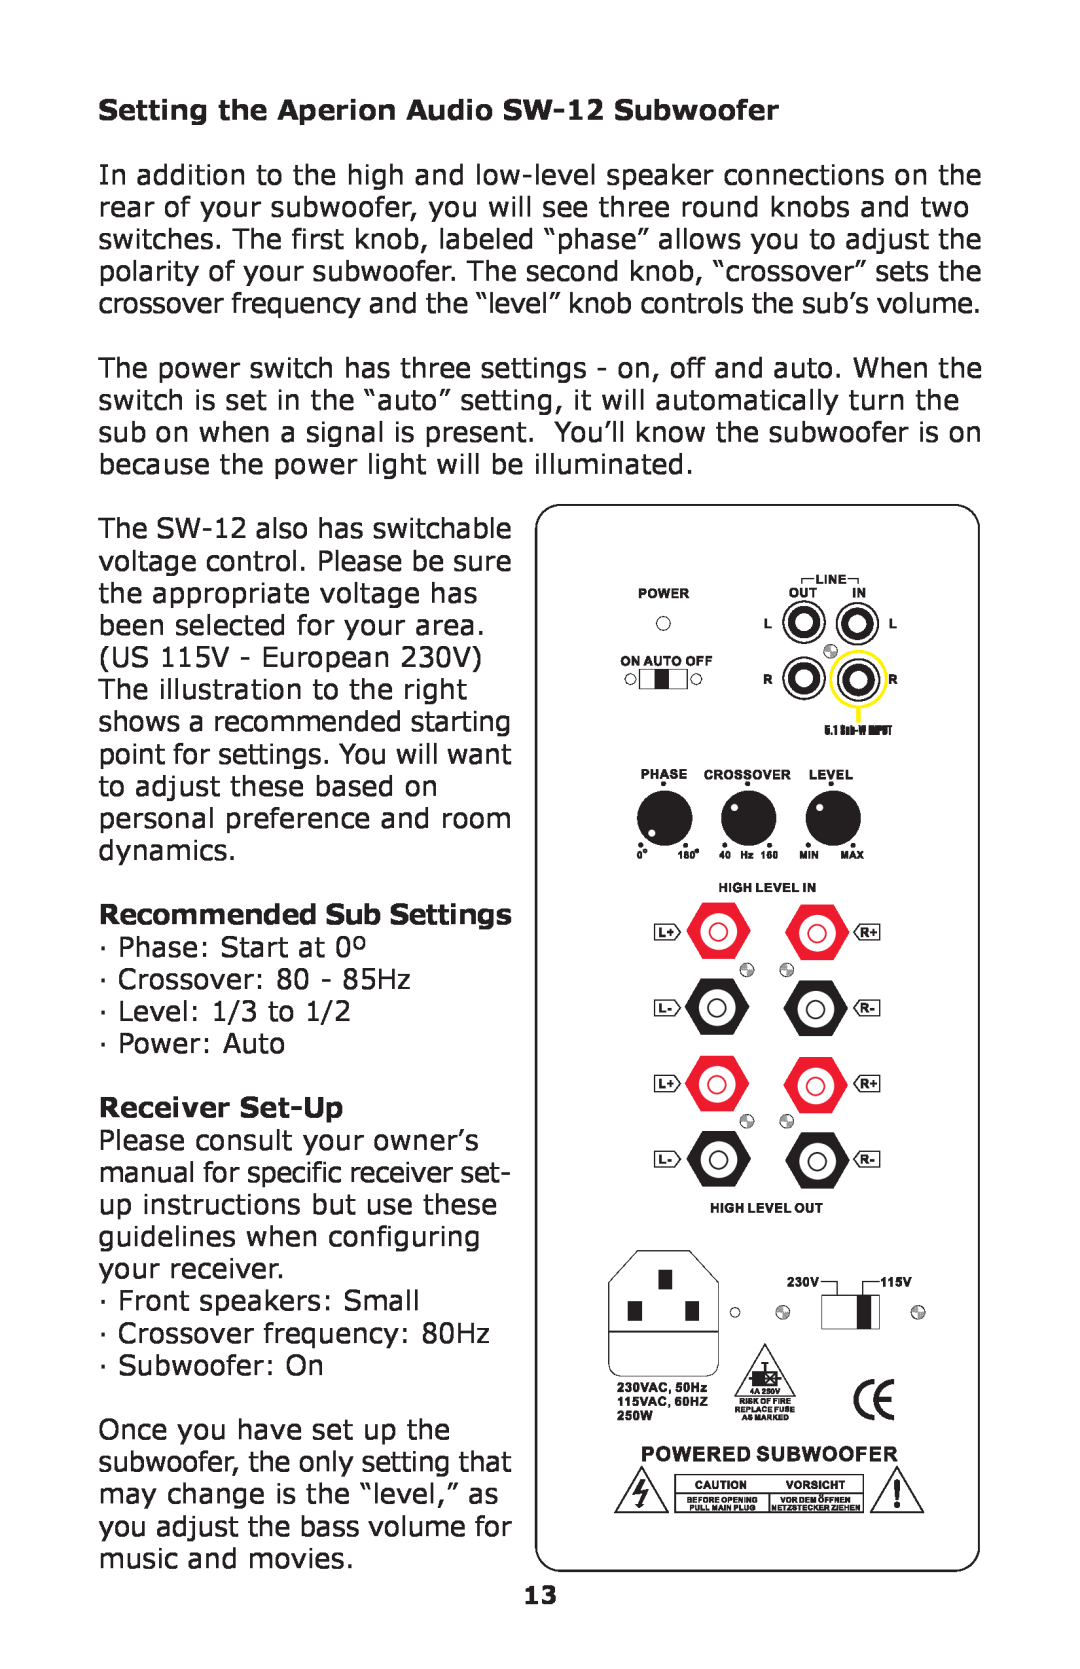 Aperion Audio SW8-APR owner manual Setting the Aperion Audio SW-12Subwoofer, Recommended Sub Settings, Receiver Set-Up 